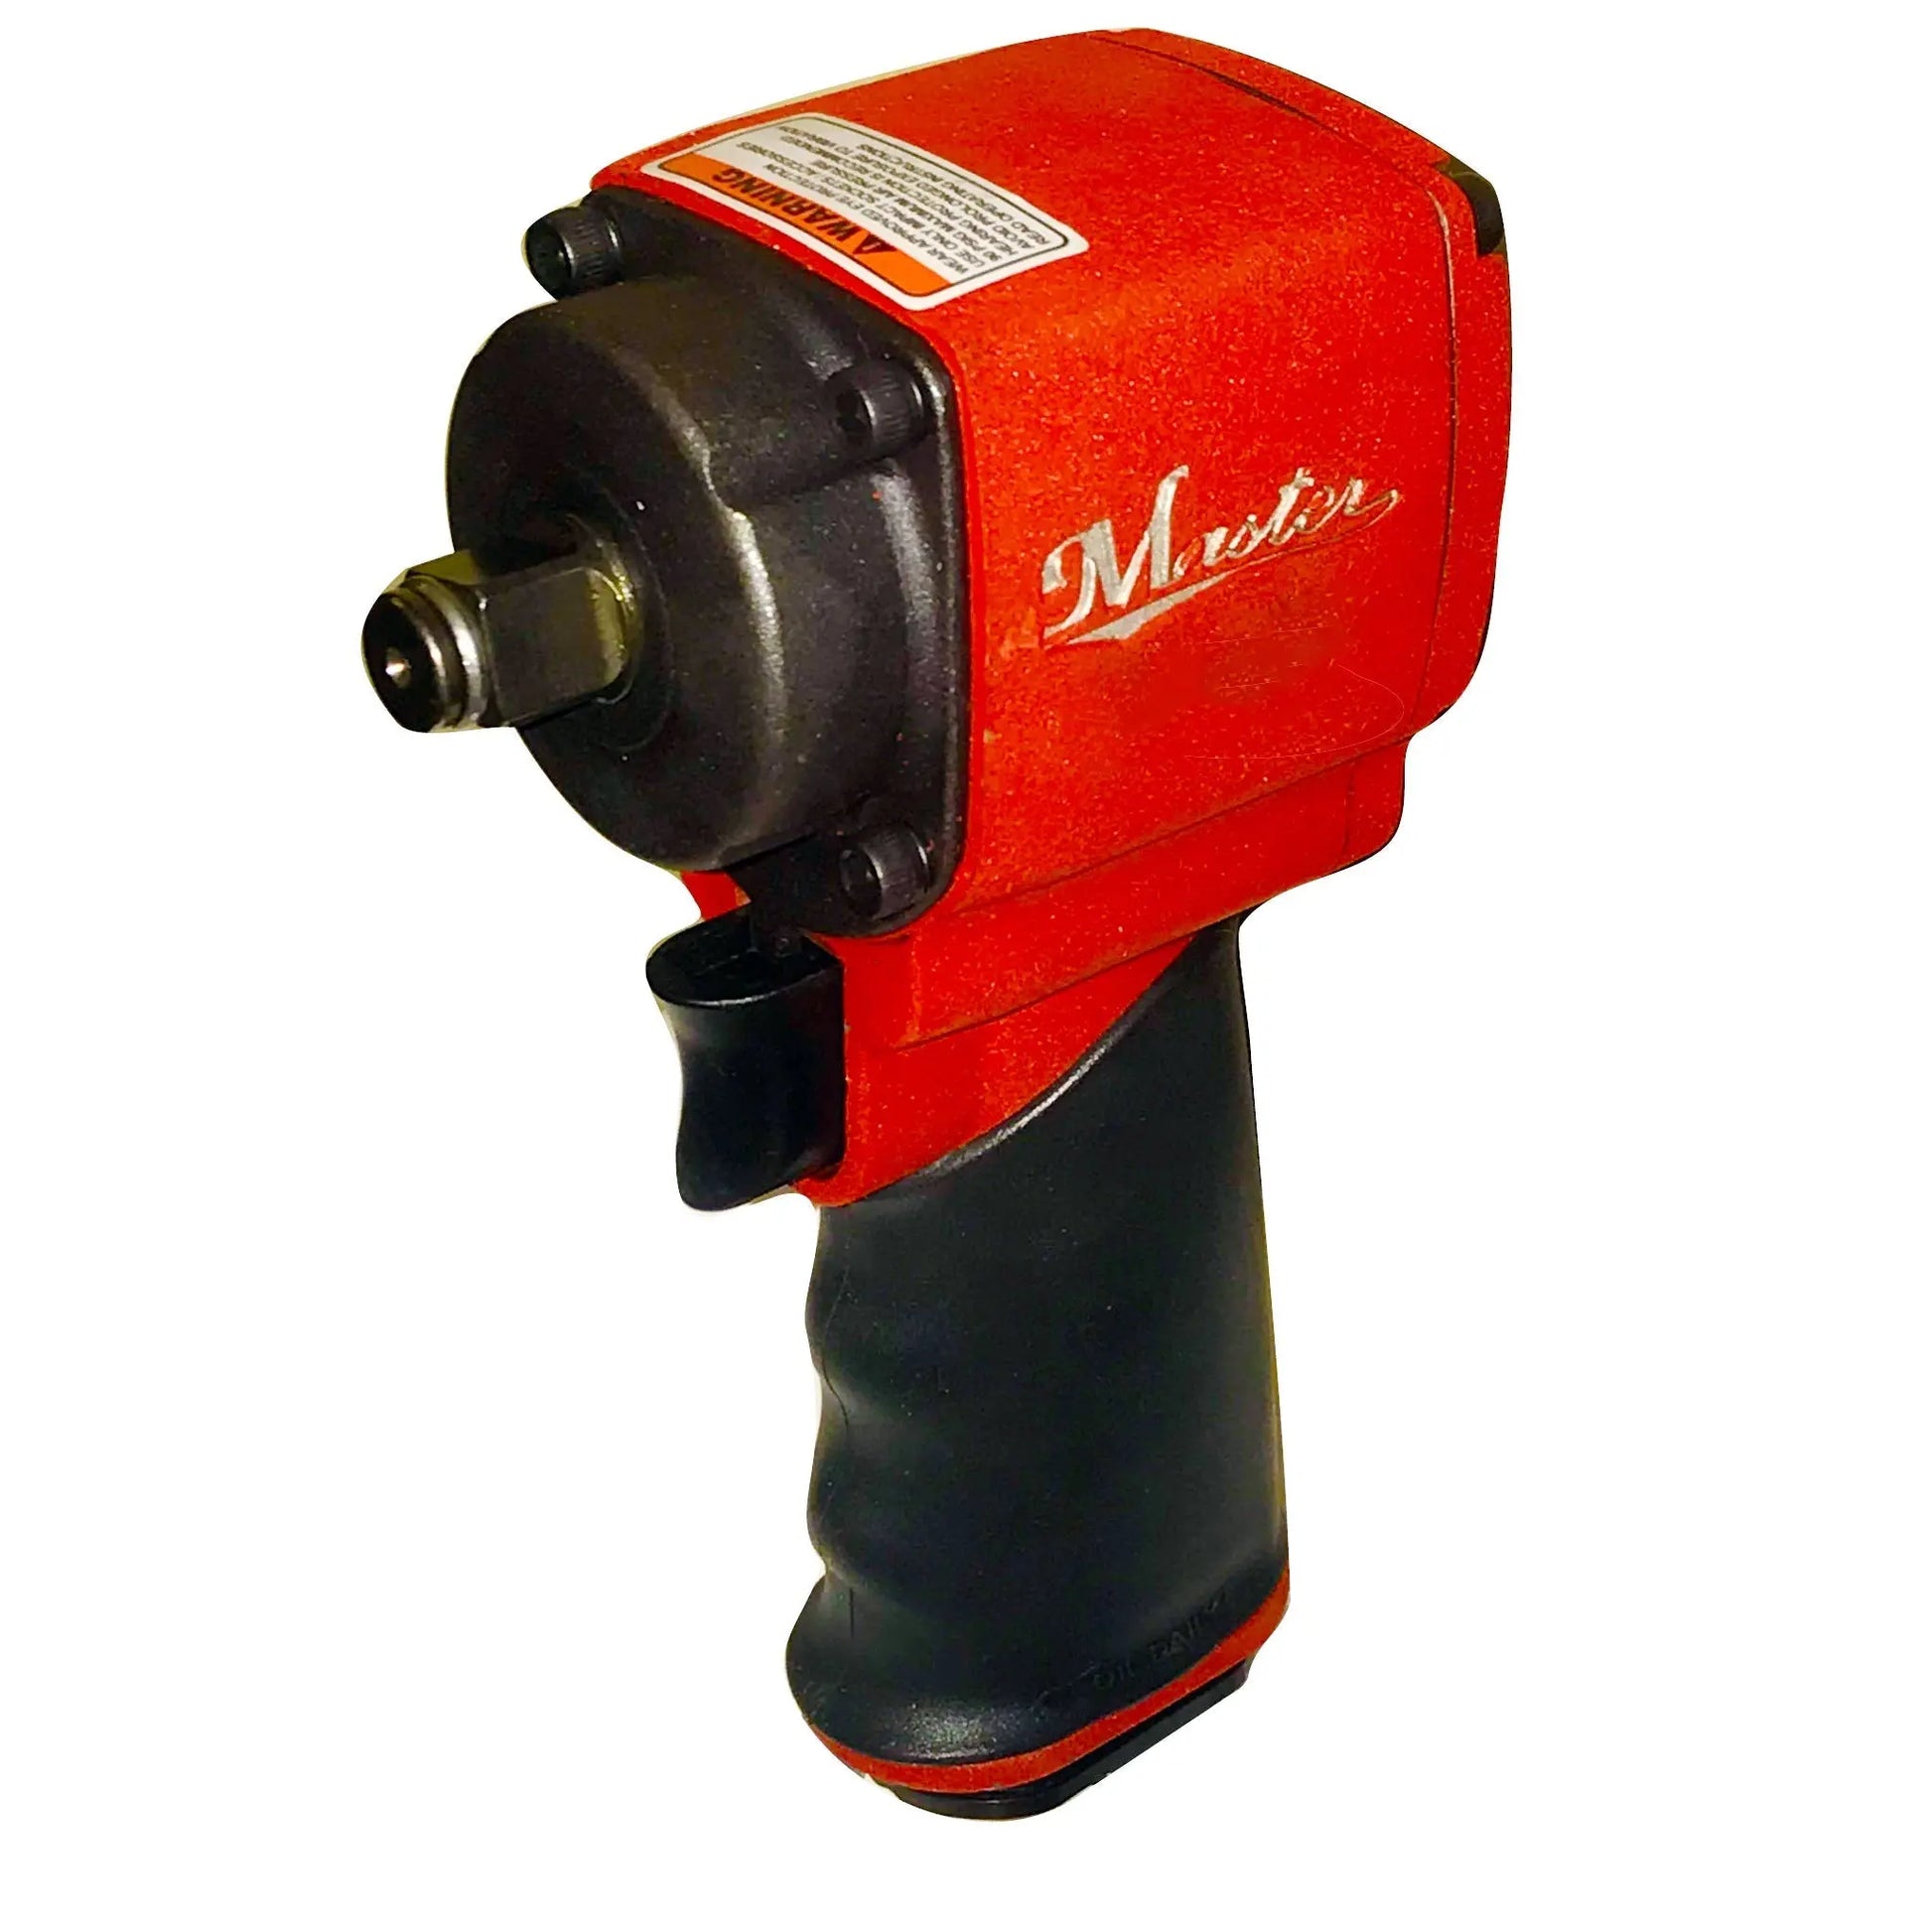 Master Palm 3/8" Ultra Compact Small Air Impact Wrench with Twin Hammer - Max. 480 Ft-lb Torque - 68200 - USD $362.86 - Master Palm Pneumatic